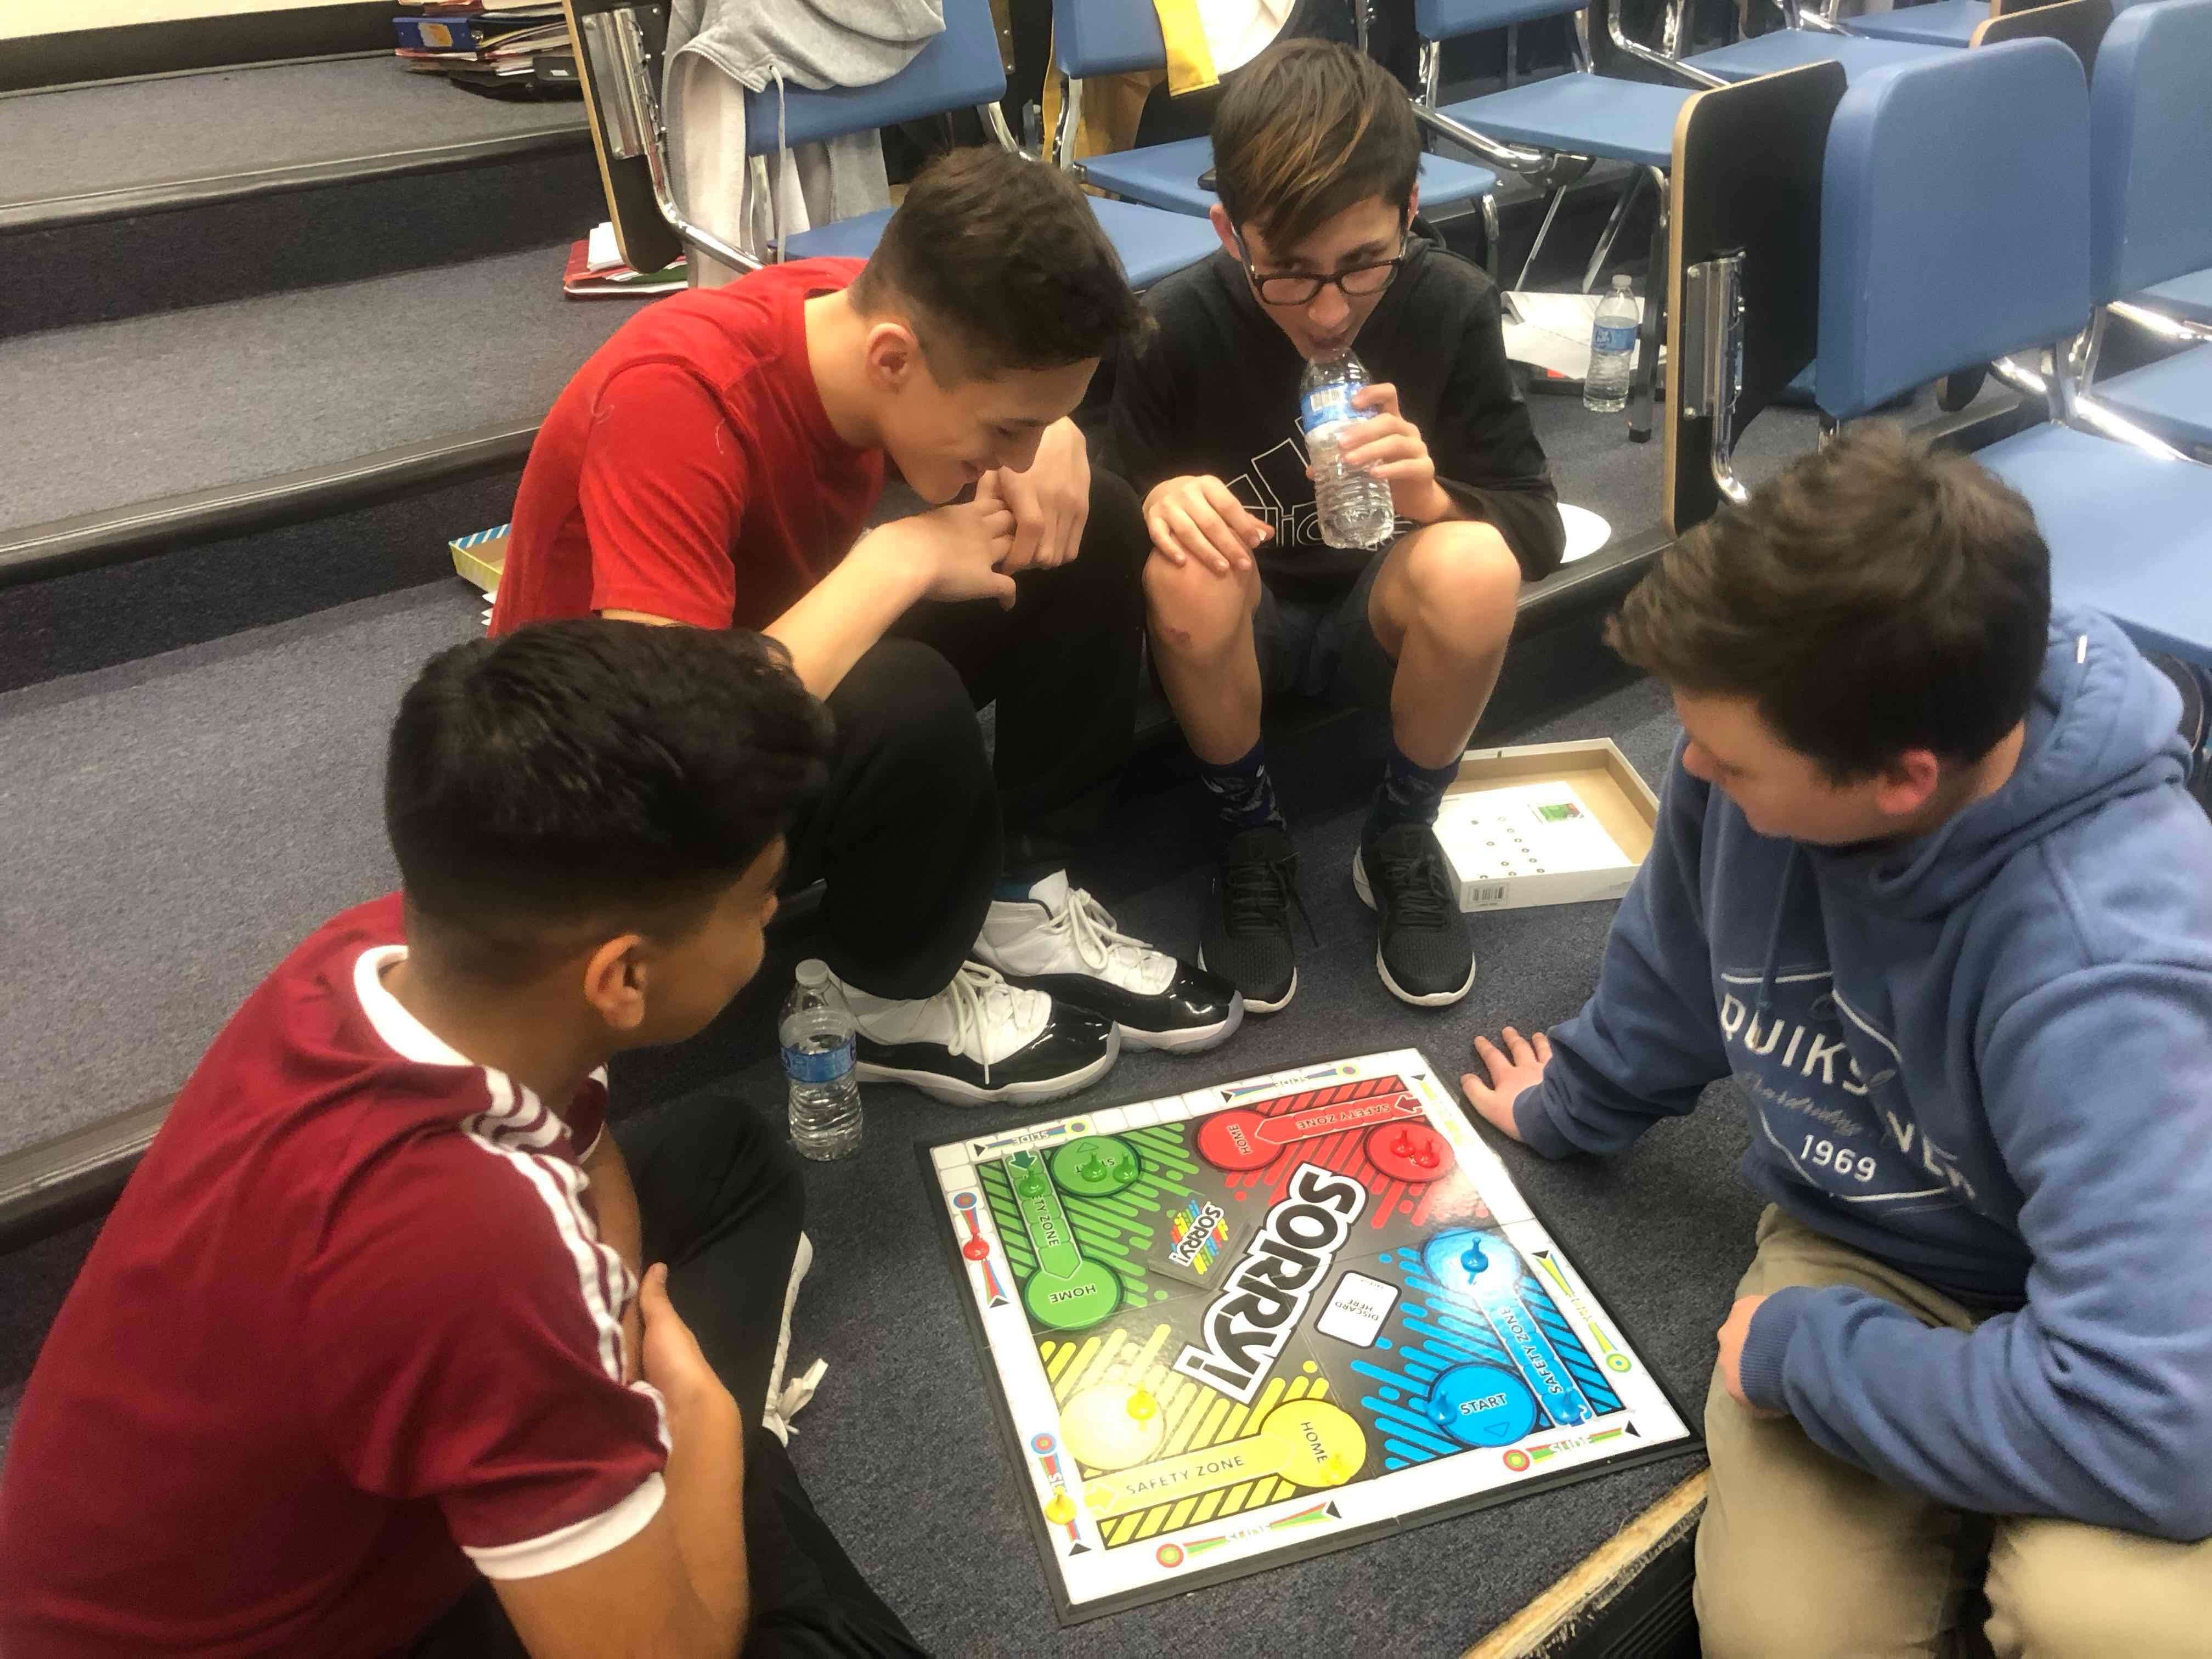 Board games bring Lower Cape May Regional High School and Richard M. Teltelman Middle School students together for a mentoring program aimed to ease transition into high school.